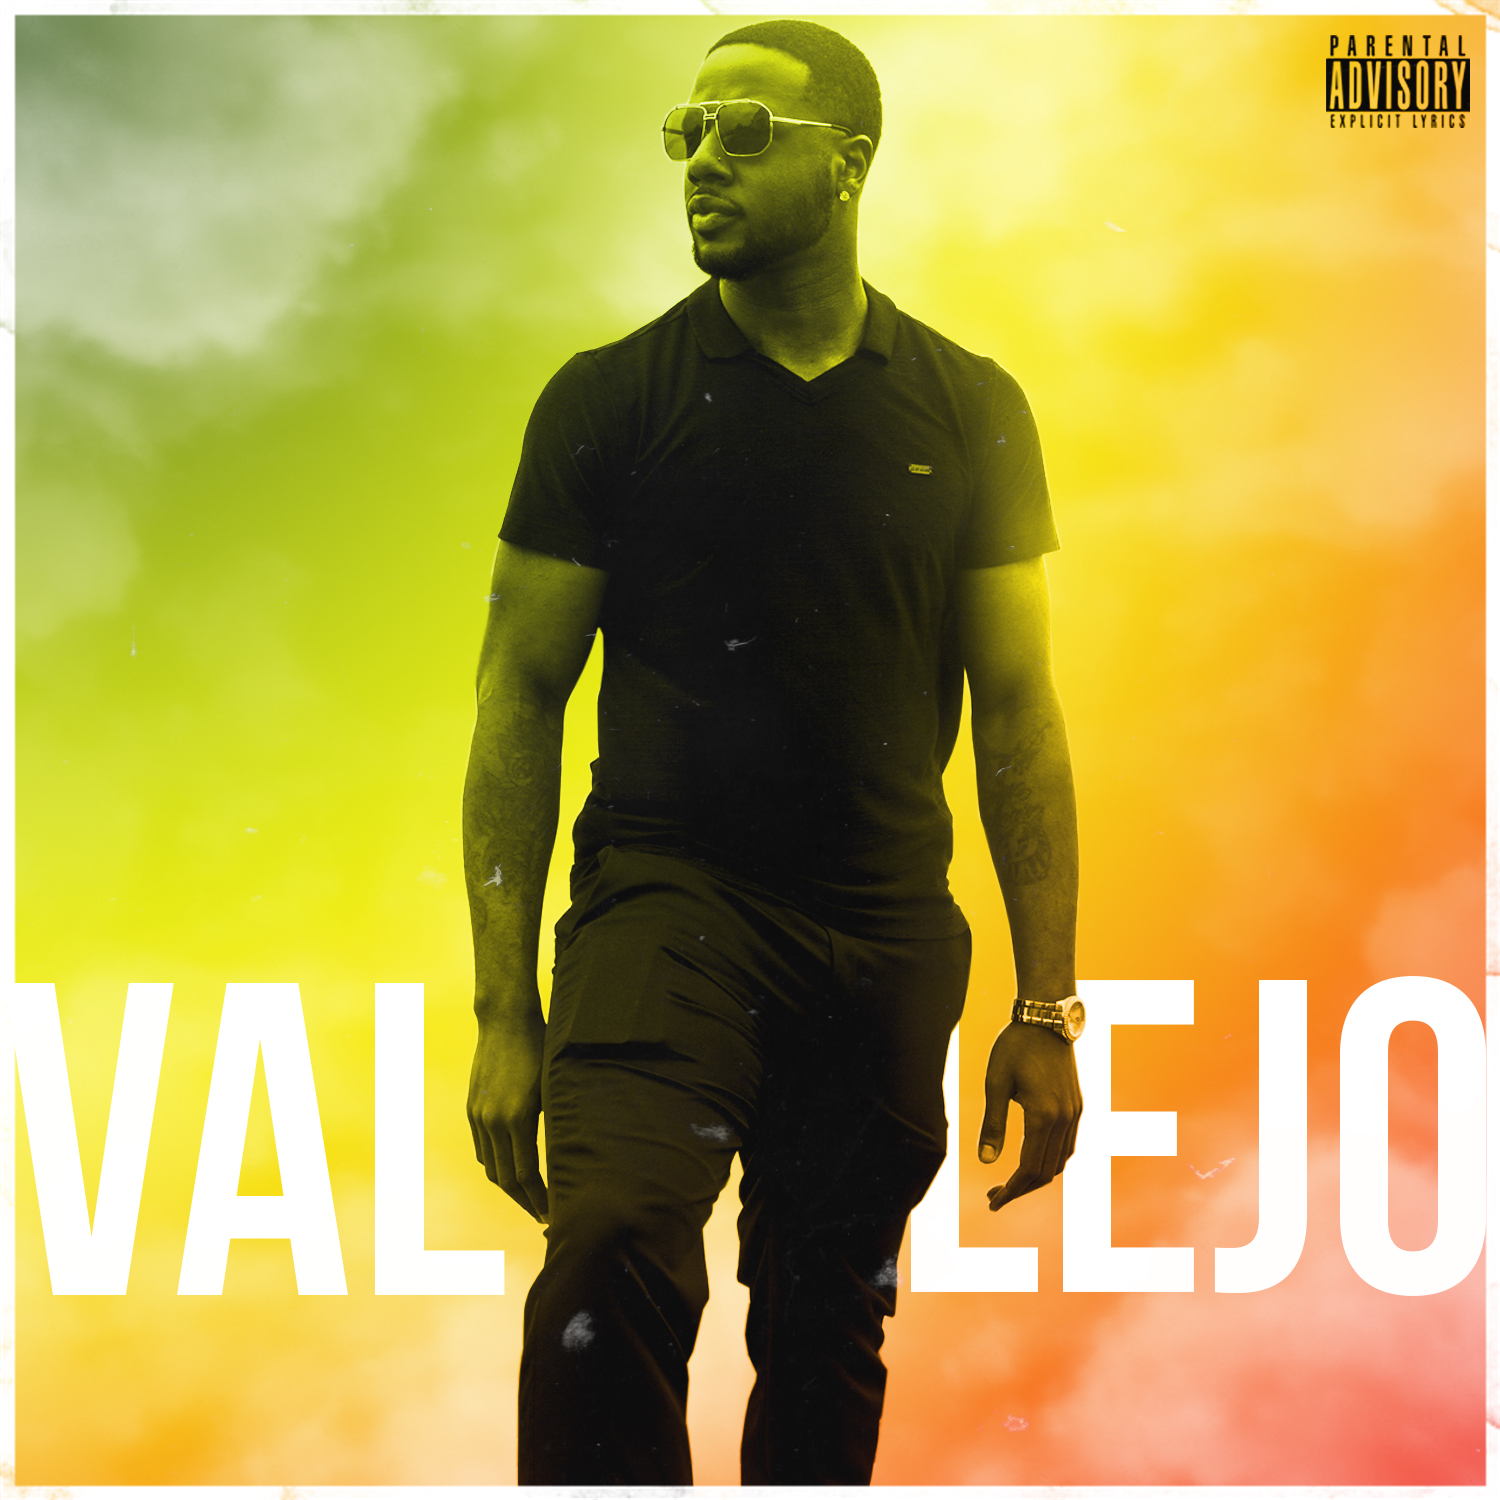 Louie Valentino (@Louie_Valentino) - "Vallejo (Where You From)" (Producer: Jaycee Brown)